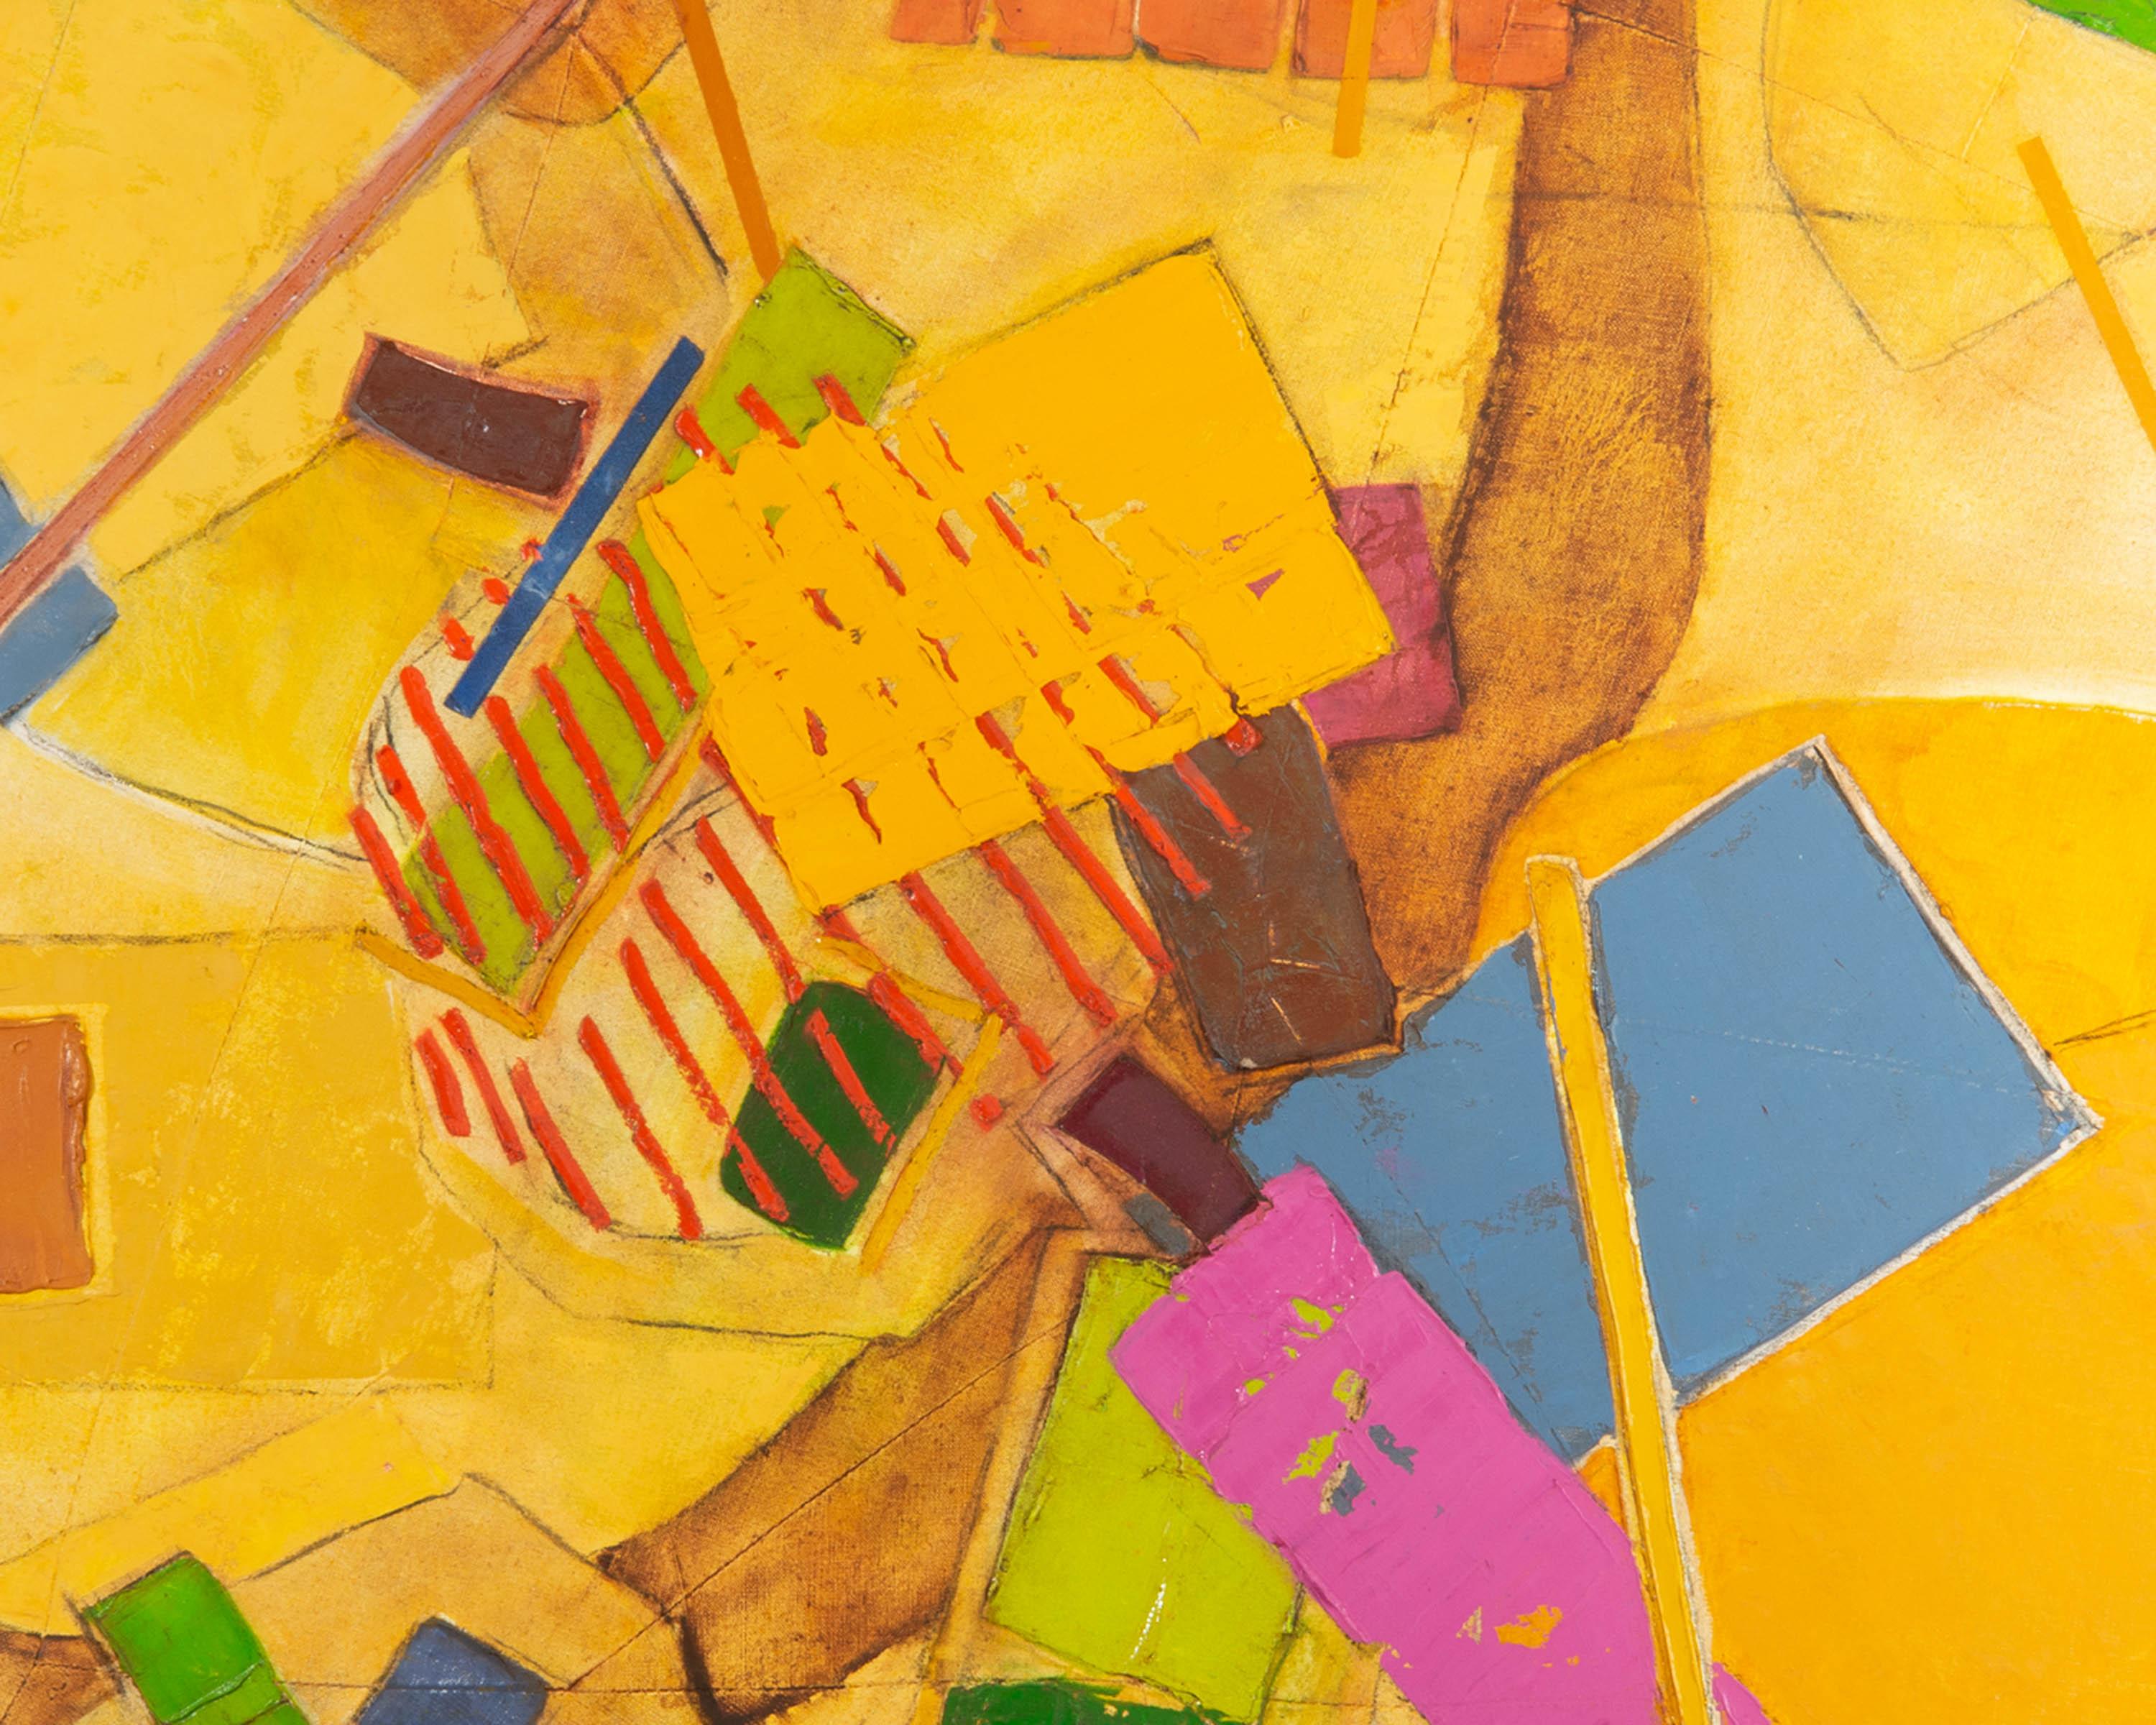 An eight sided abstract oil on canvas titled Yellow-Pink by Canadian artist Walter Sorge (1931-2021). Pink, green and blue slashes are depicted among a variety of colorful raised shapes and textures upon a yellow ground. The canvas has been created